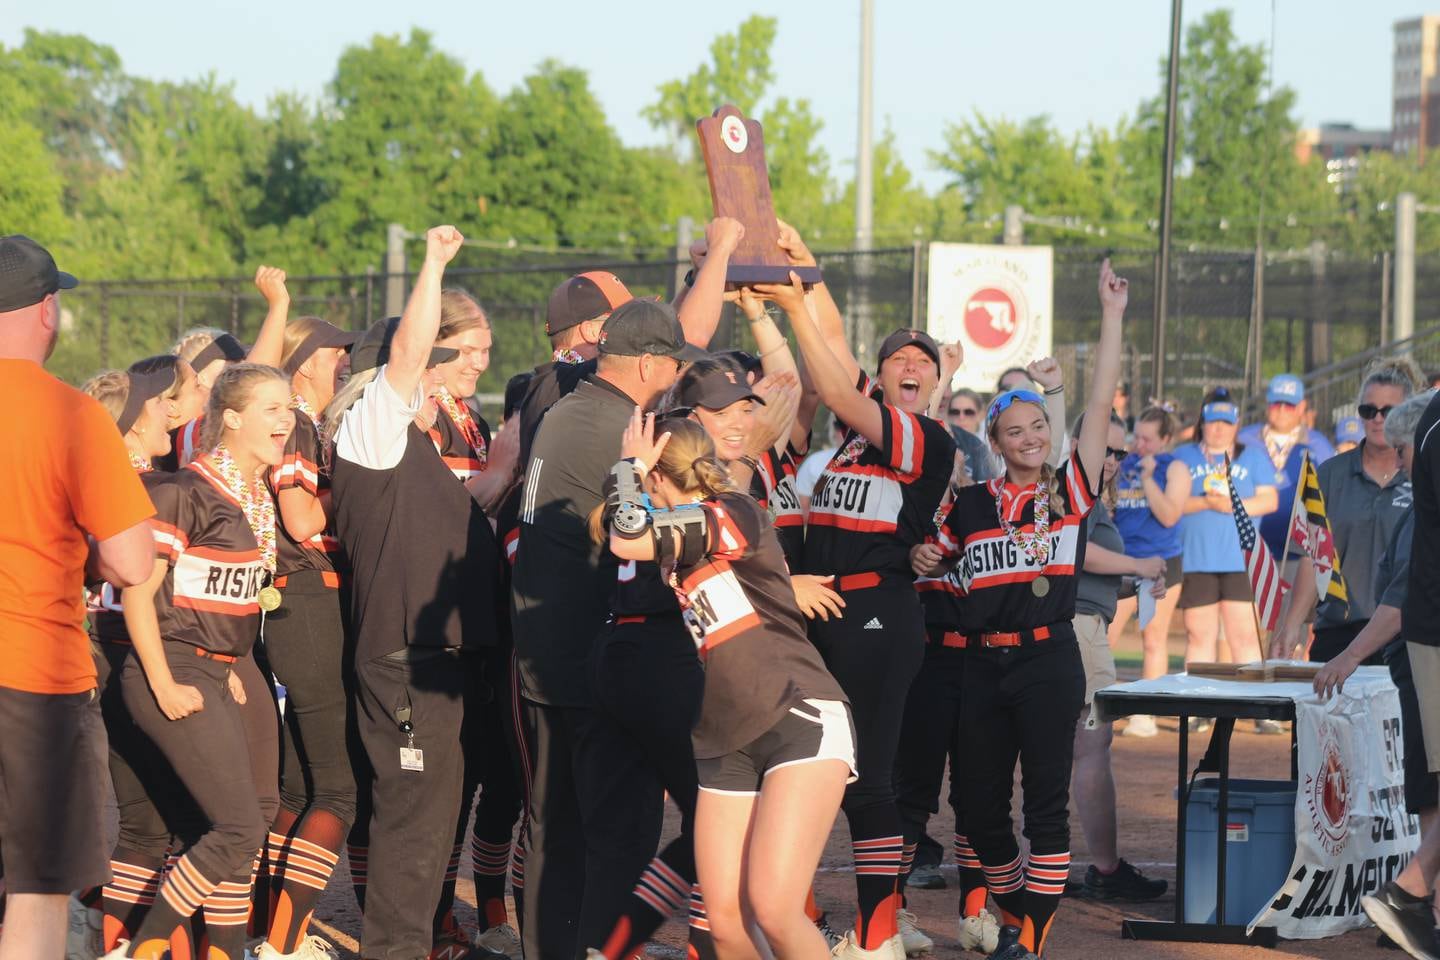 Rising Sun senior Cadence Williams help hoist the Class 2A state softball championship game Friday. The fourth-ranked Tigers won their first state title since 2003 with a 1-0 extra inning victory over Calvert at the University of Maryland.